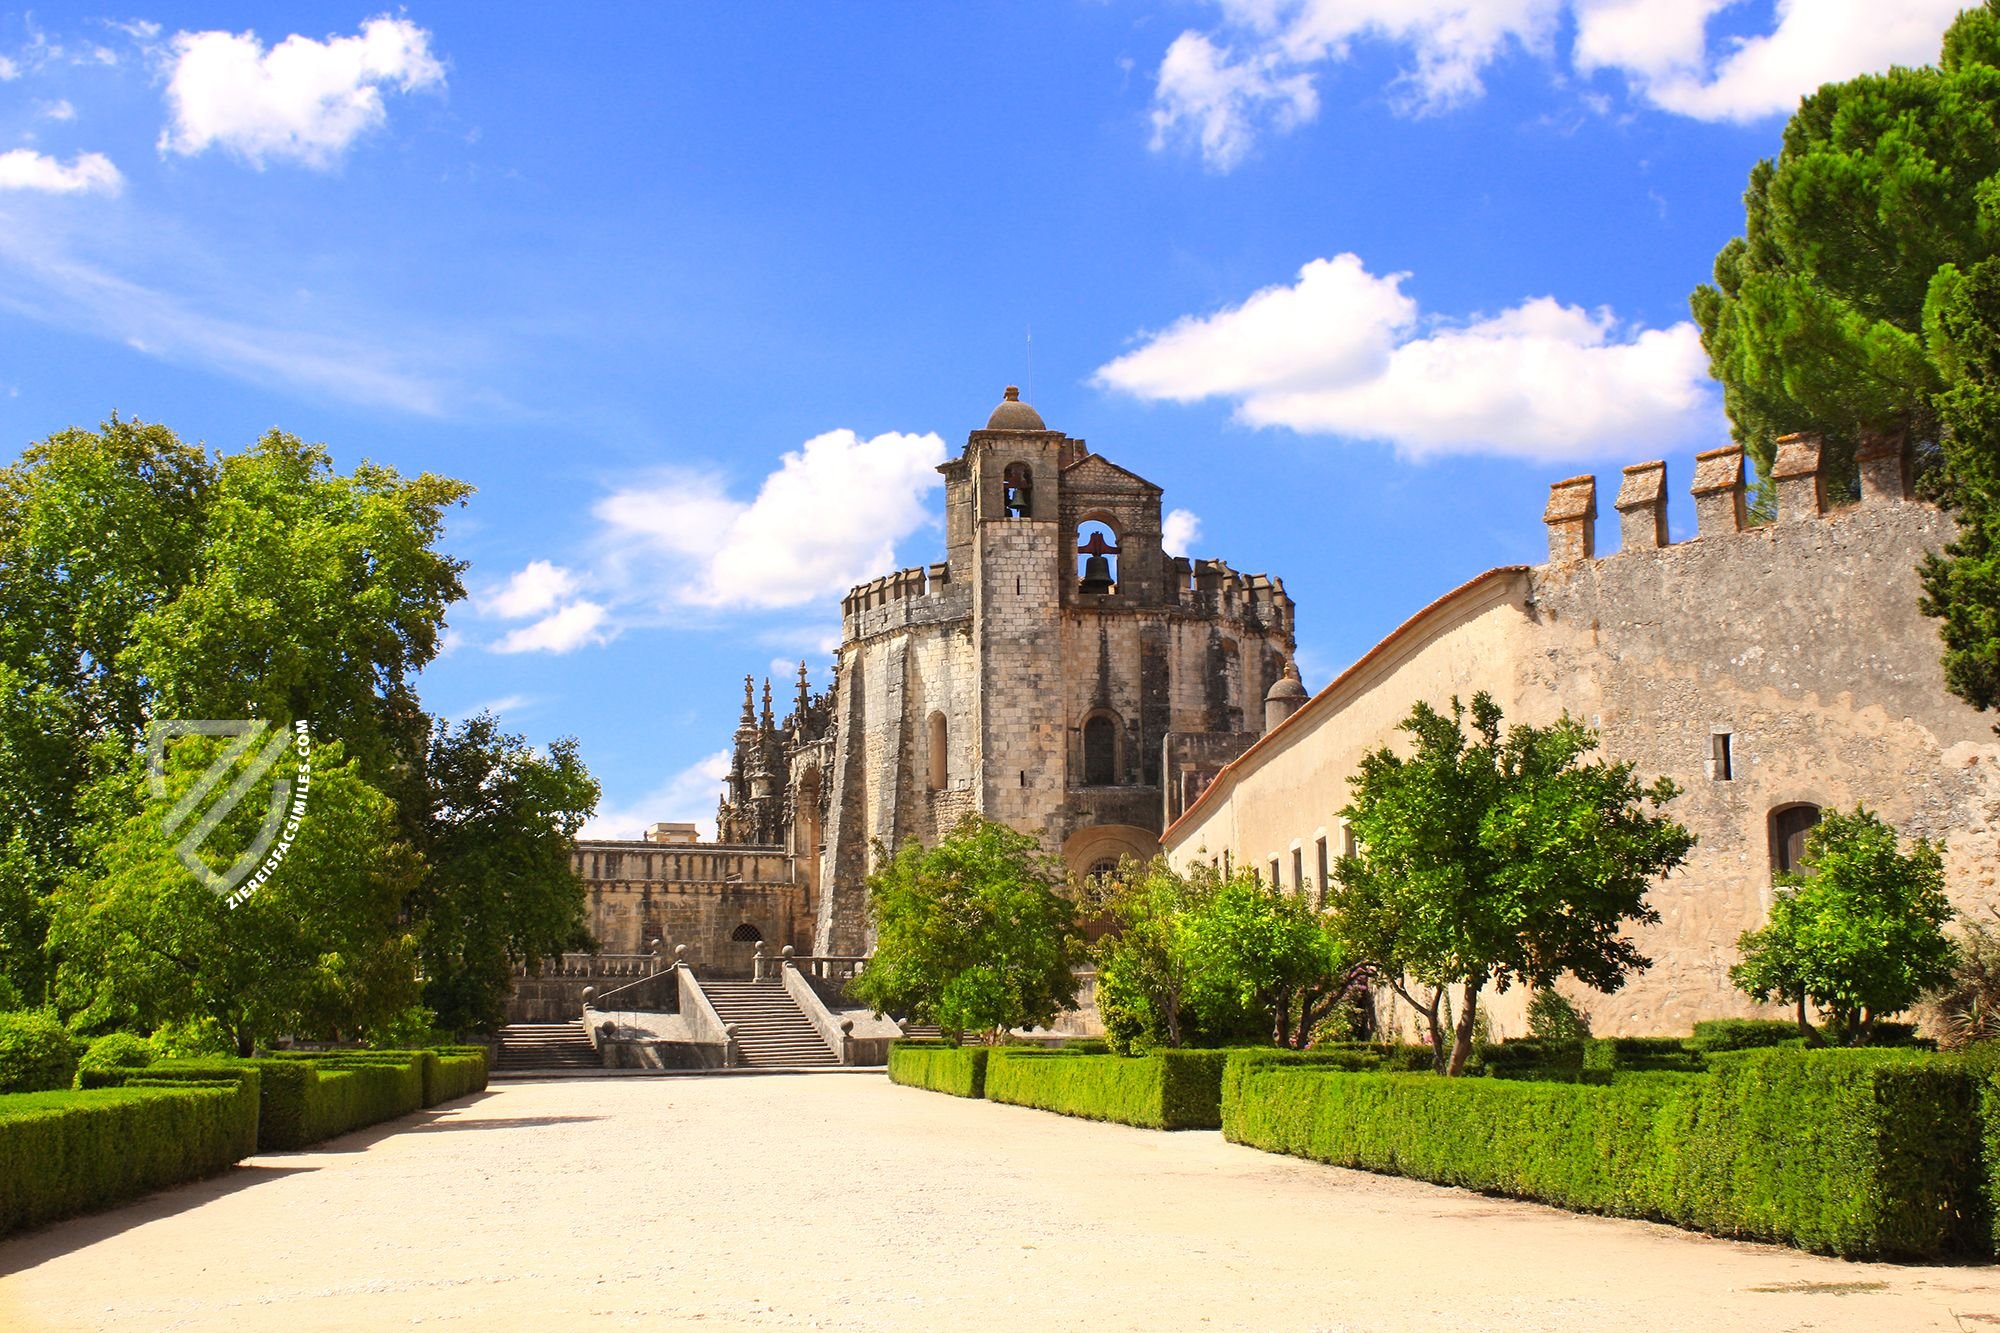 The Convent of Christ in Tomar (Source: iStock/frentusha)